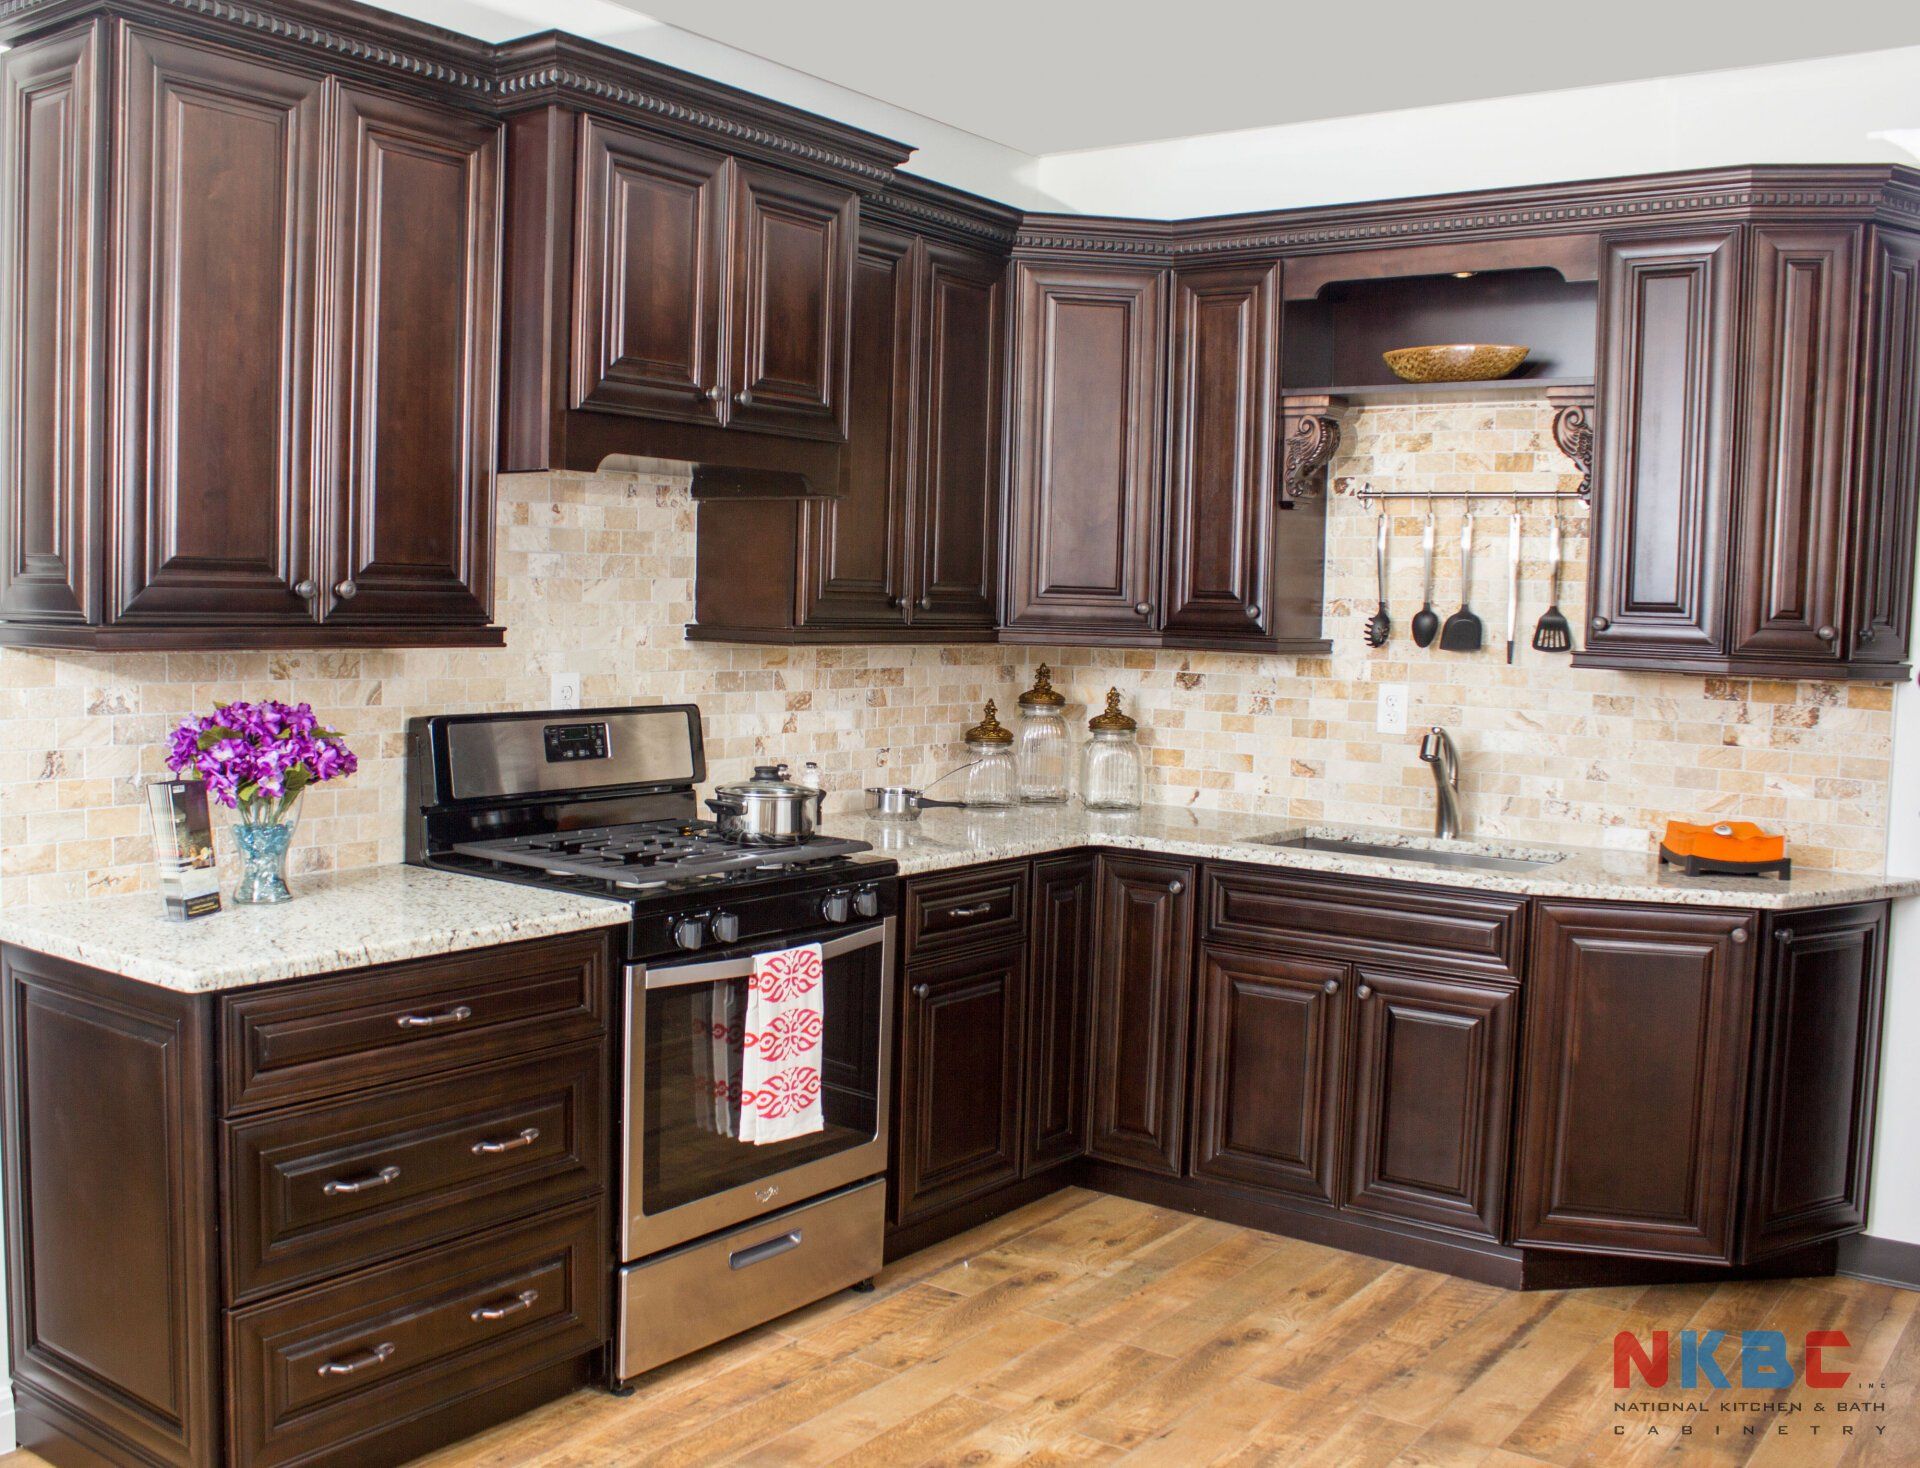 national kitchen and bath cabinetry illinois